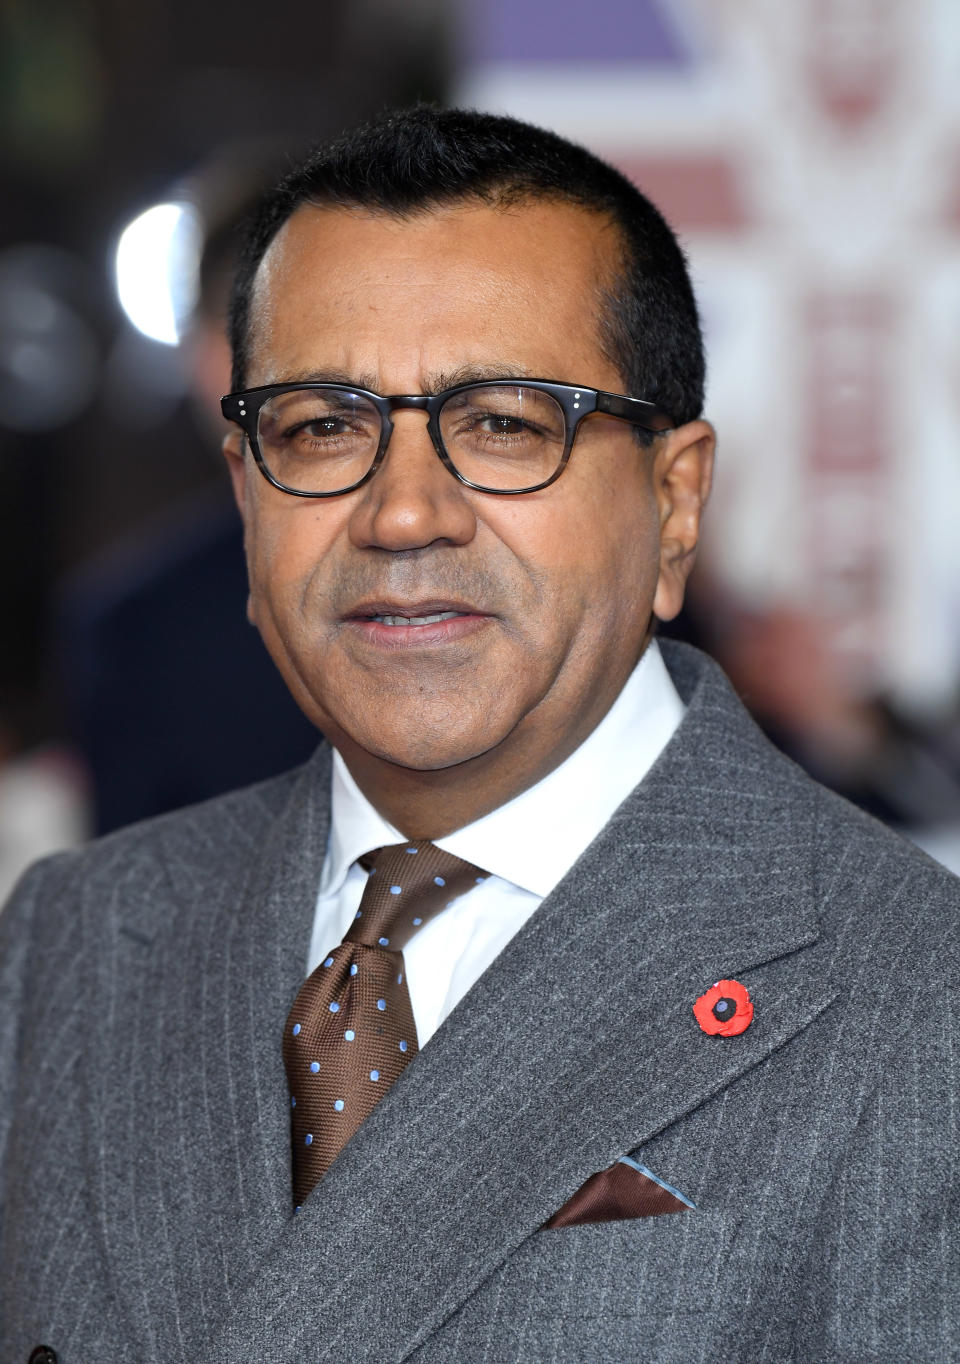 LONDON, ENGLAND - OCTOBER 28: Martin Bashir attends the Pride Of Britain Awards 2019 at The Grosvenor House Hotel on October 28, 2019 in London, England. (Photo by Karwai Tang/WireImage)